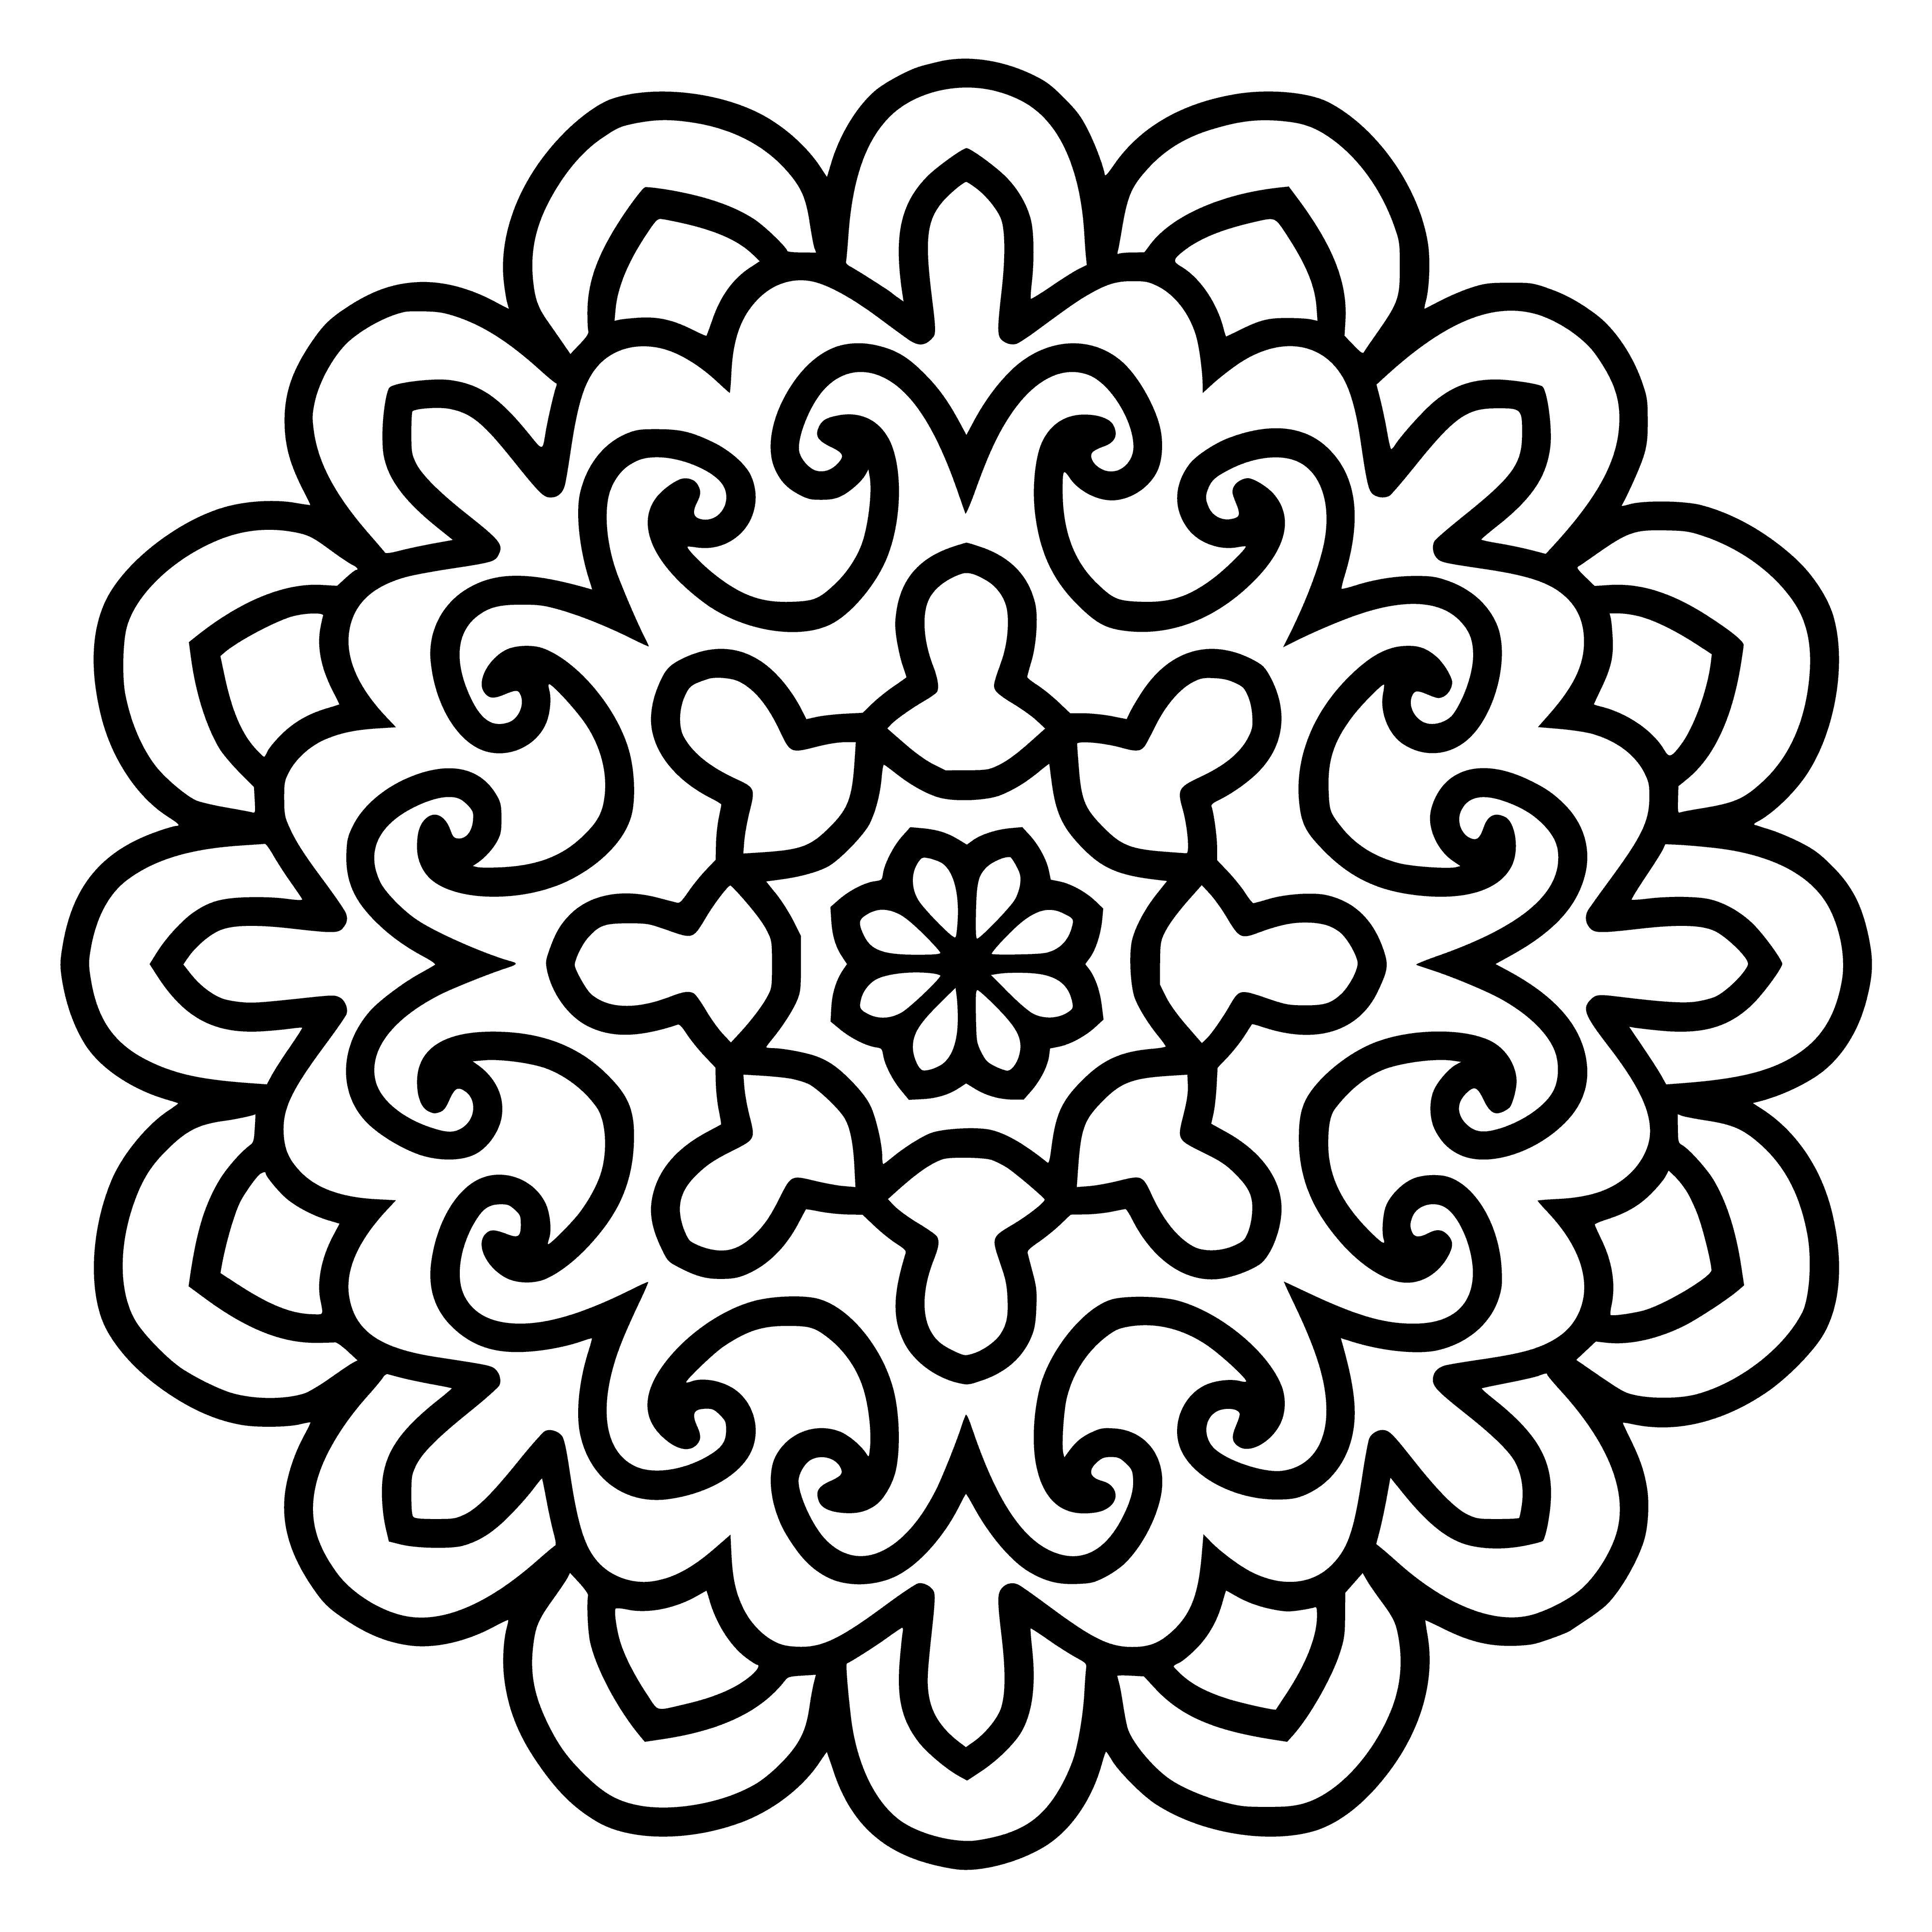 coloring page: Mandalas are a circular design used in Hinduism & Buddhism for meditation & healing. Mandala coloring pages can help one relax & de-stress.